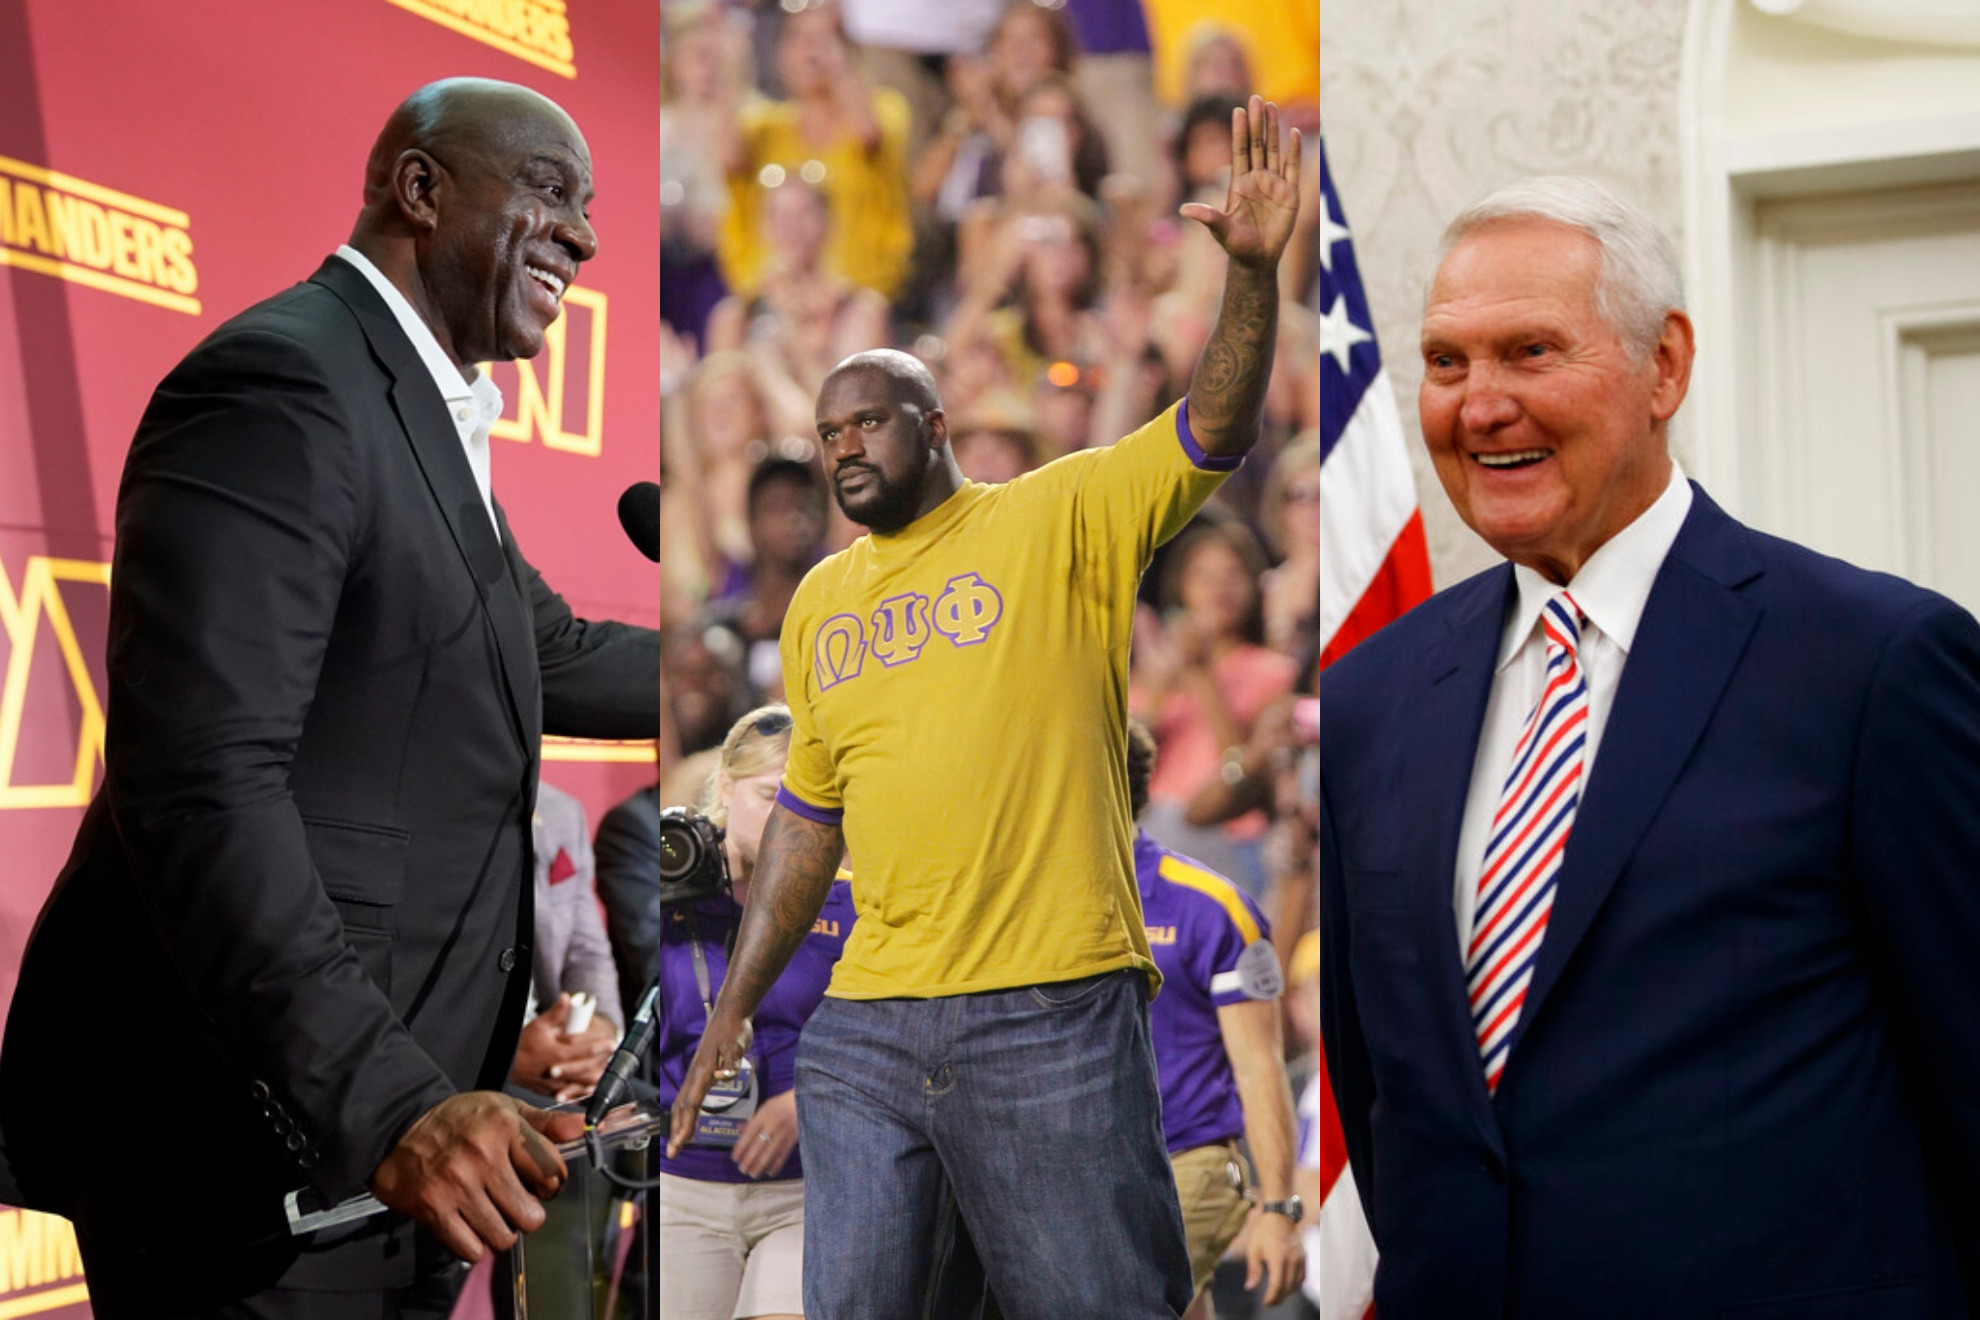 Magic Johnson, Shaquille ONeal, Jerry West...which former Laker just became a billionaire?